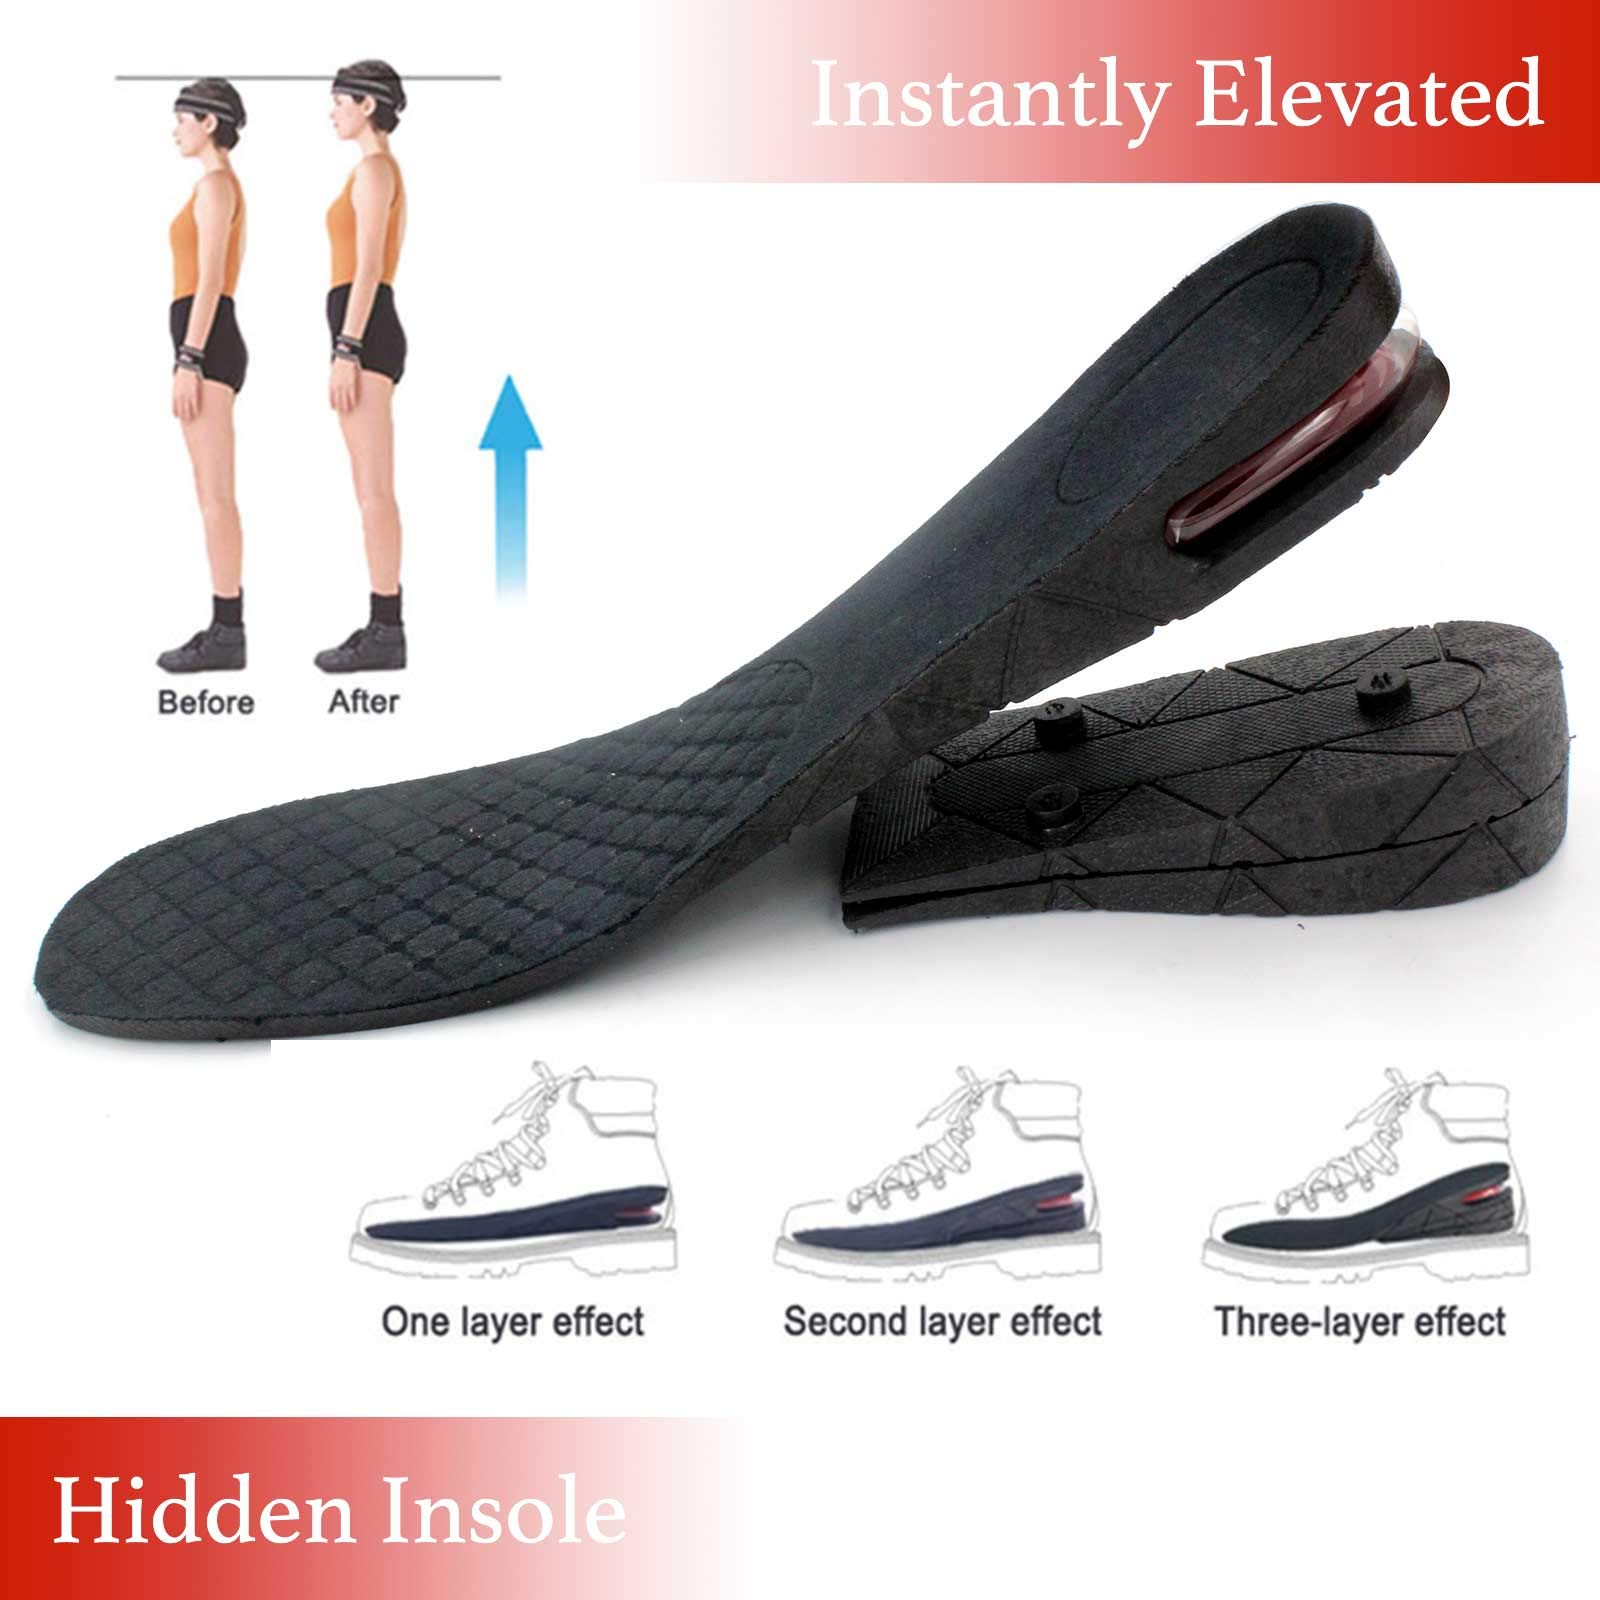 Height Increase Shoe Insoles Air Cushion 3-Layer 2.75 inch /7cm Make You  Taller,Supportive Comfort